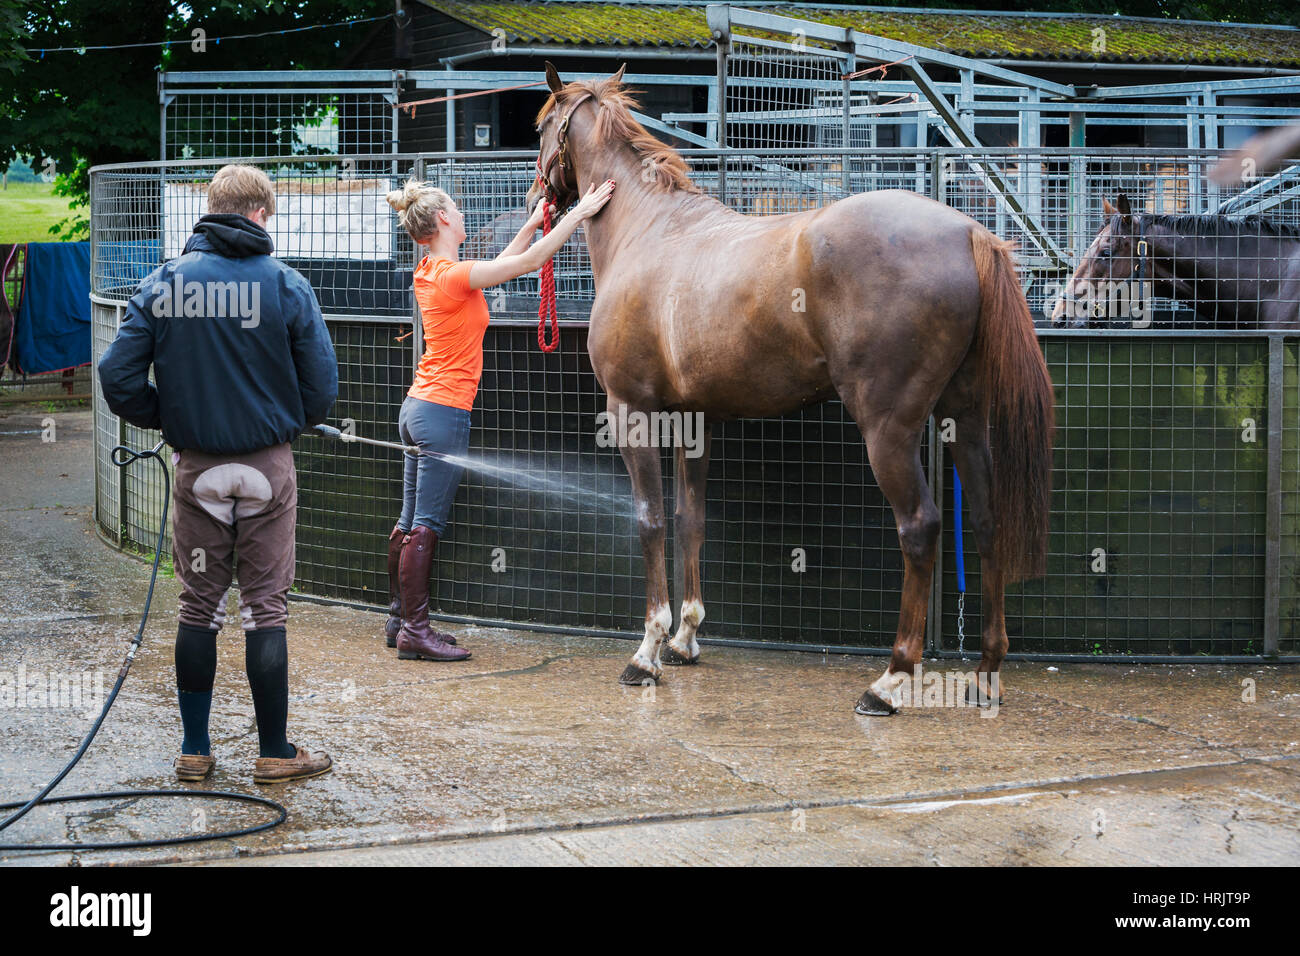 Woman and man hosing down a bay horse in a stable yard. Stock Photo